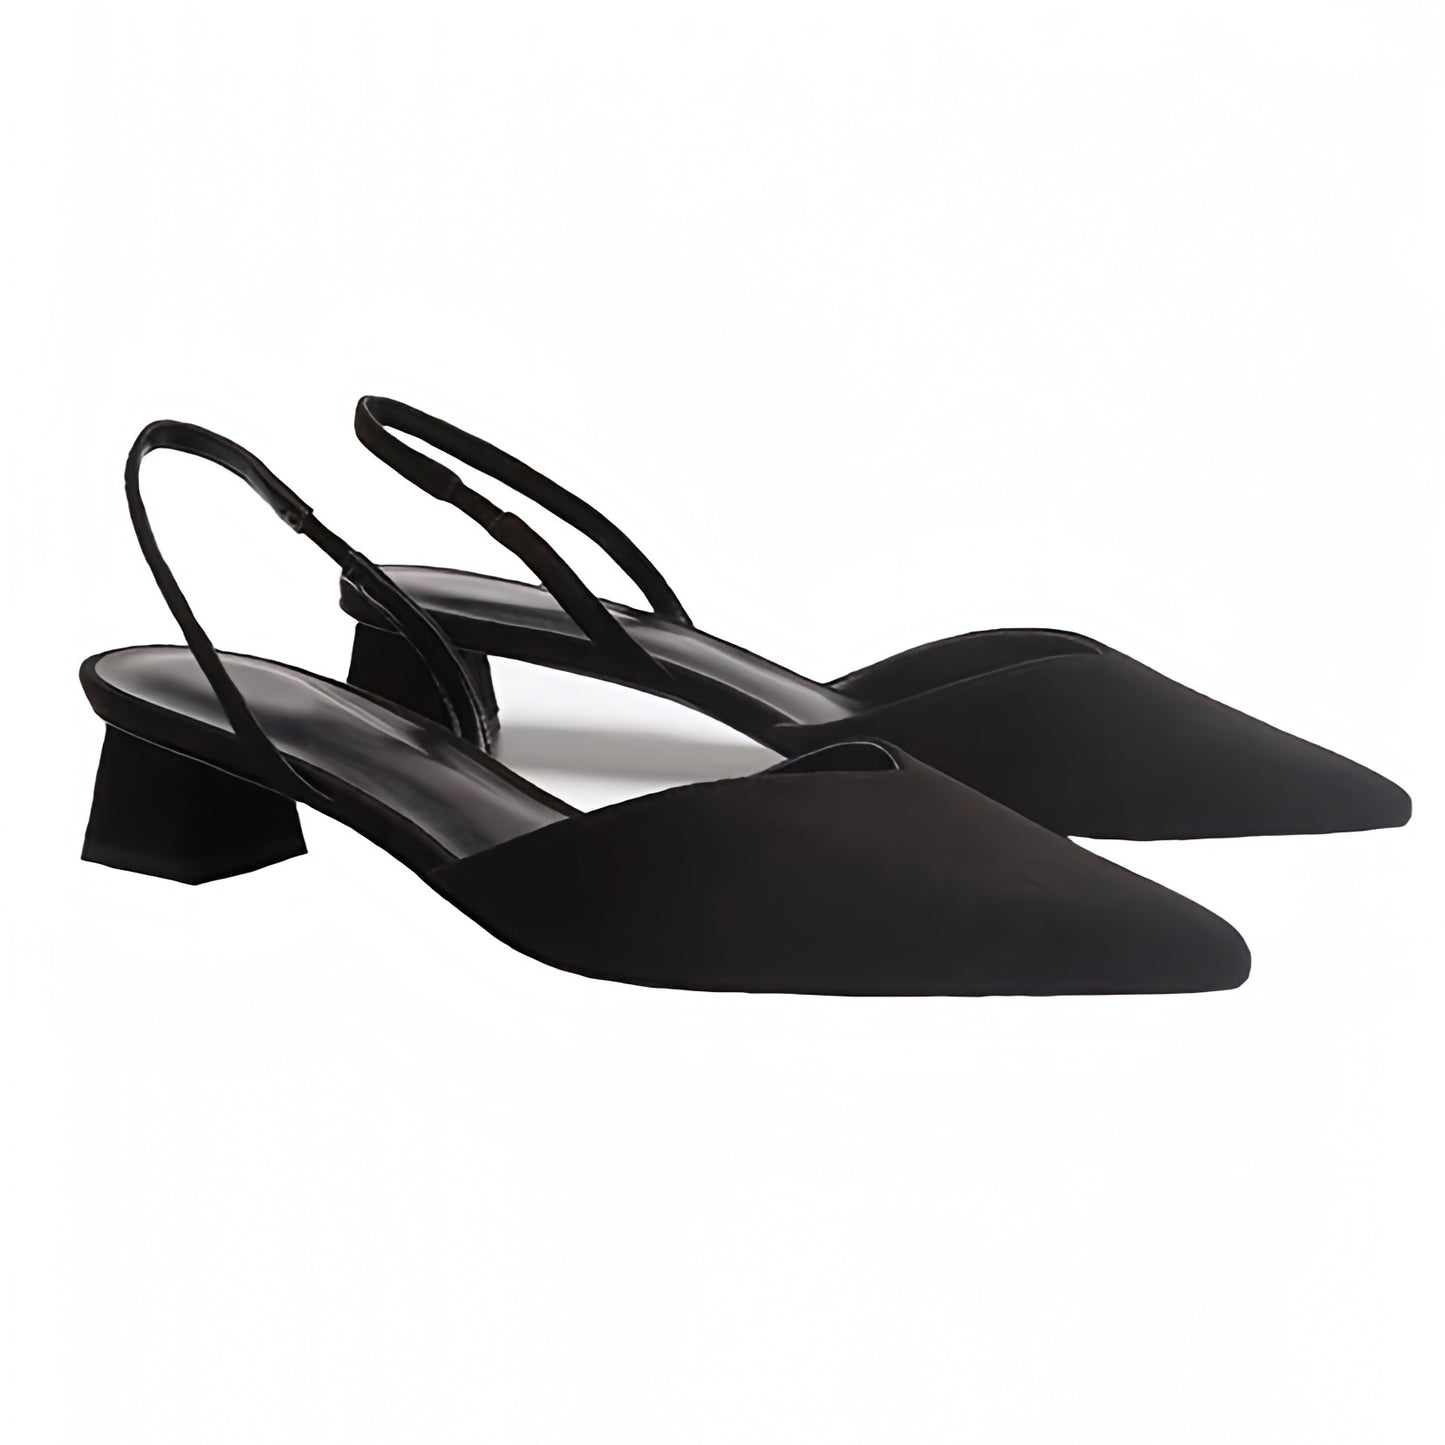 black-slim-fit-slingback-strappy-low-medium-mid-block-heel-vegan-faux-suede-leather-pointy-toe-kitten-silhouette-sandals-high-heels-pumps-shoes-women-ladies-chic-trendy-spring-2024-summer-elegant-classy-classic-feminine-semi-formal-casual-vintage-gala-prom-hoco-homecoming-date-night-out-sexy-vacation-old-money-quiet-luxury-90s-minimalist-minimalism-office-siren-stockholm-style-revolve-dolce-vita-dupe